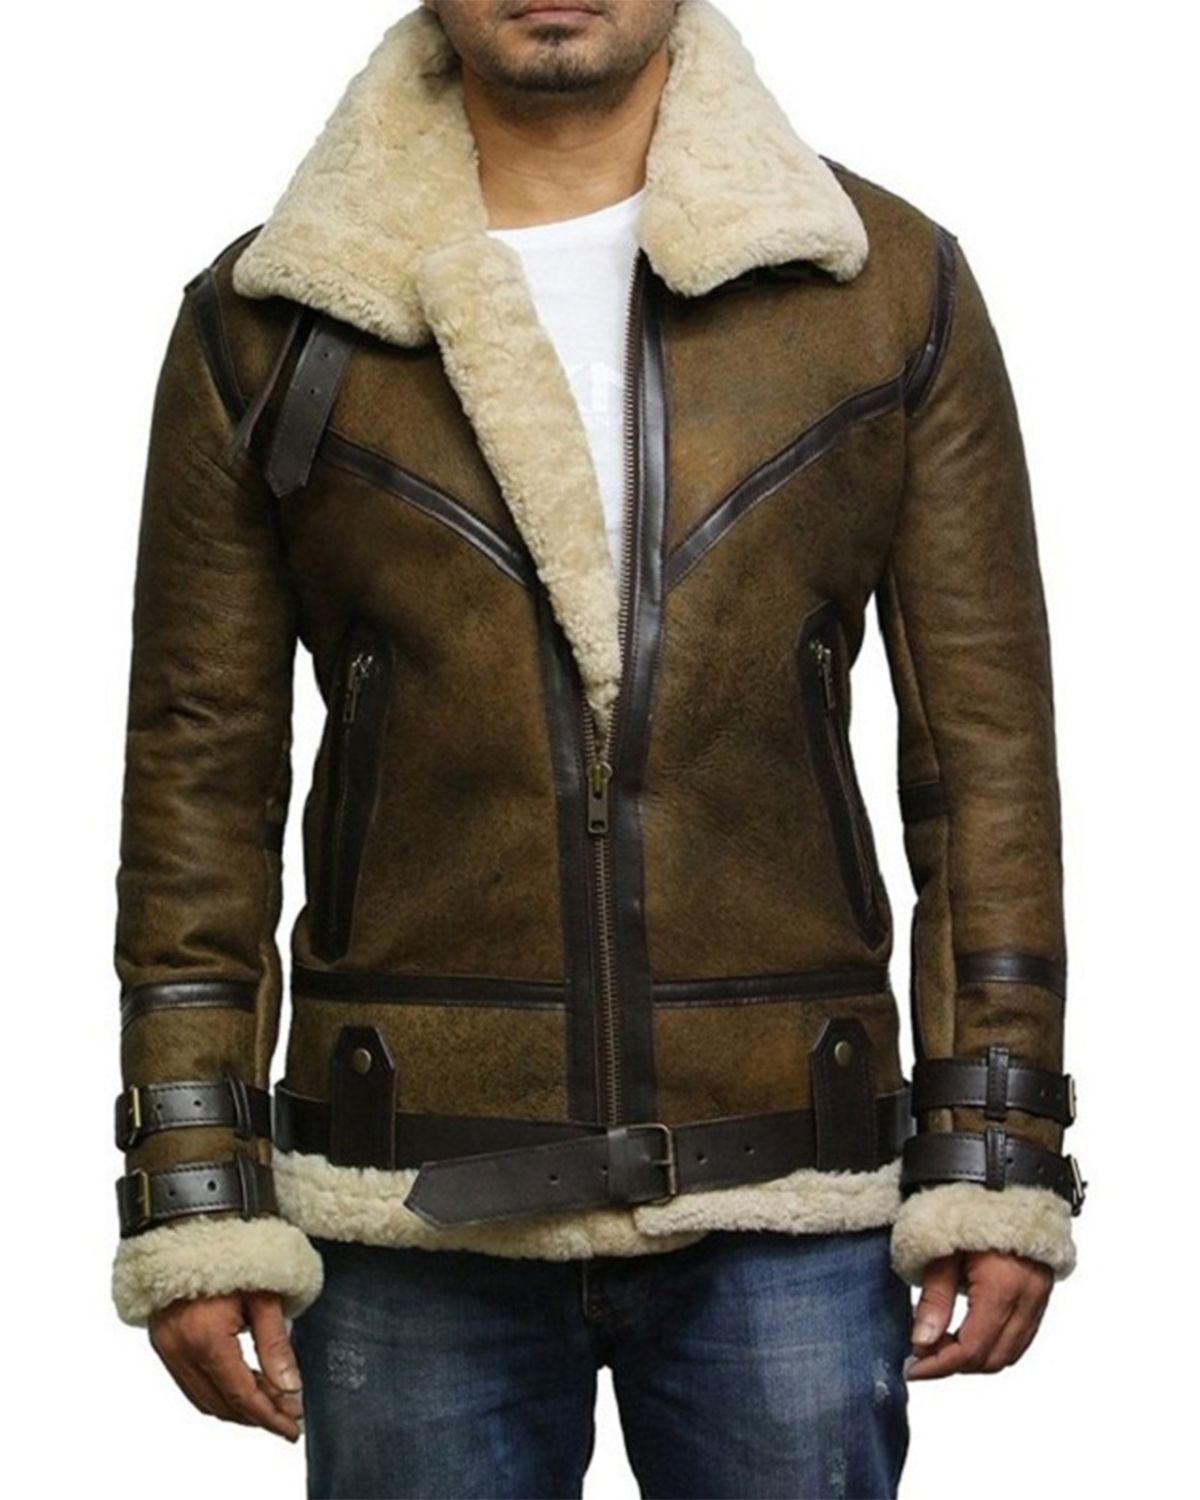 Mens Waxed Green Bomber Real Leather Jacket - Welcome To All Star Jacket